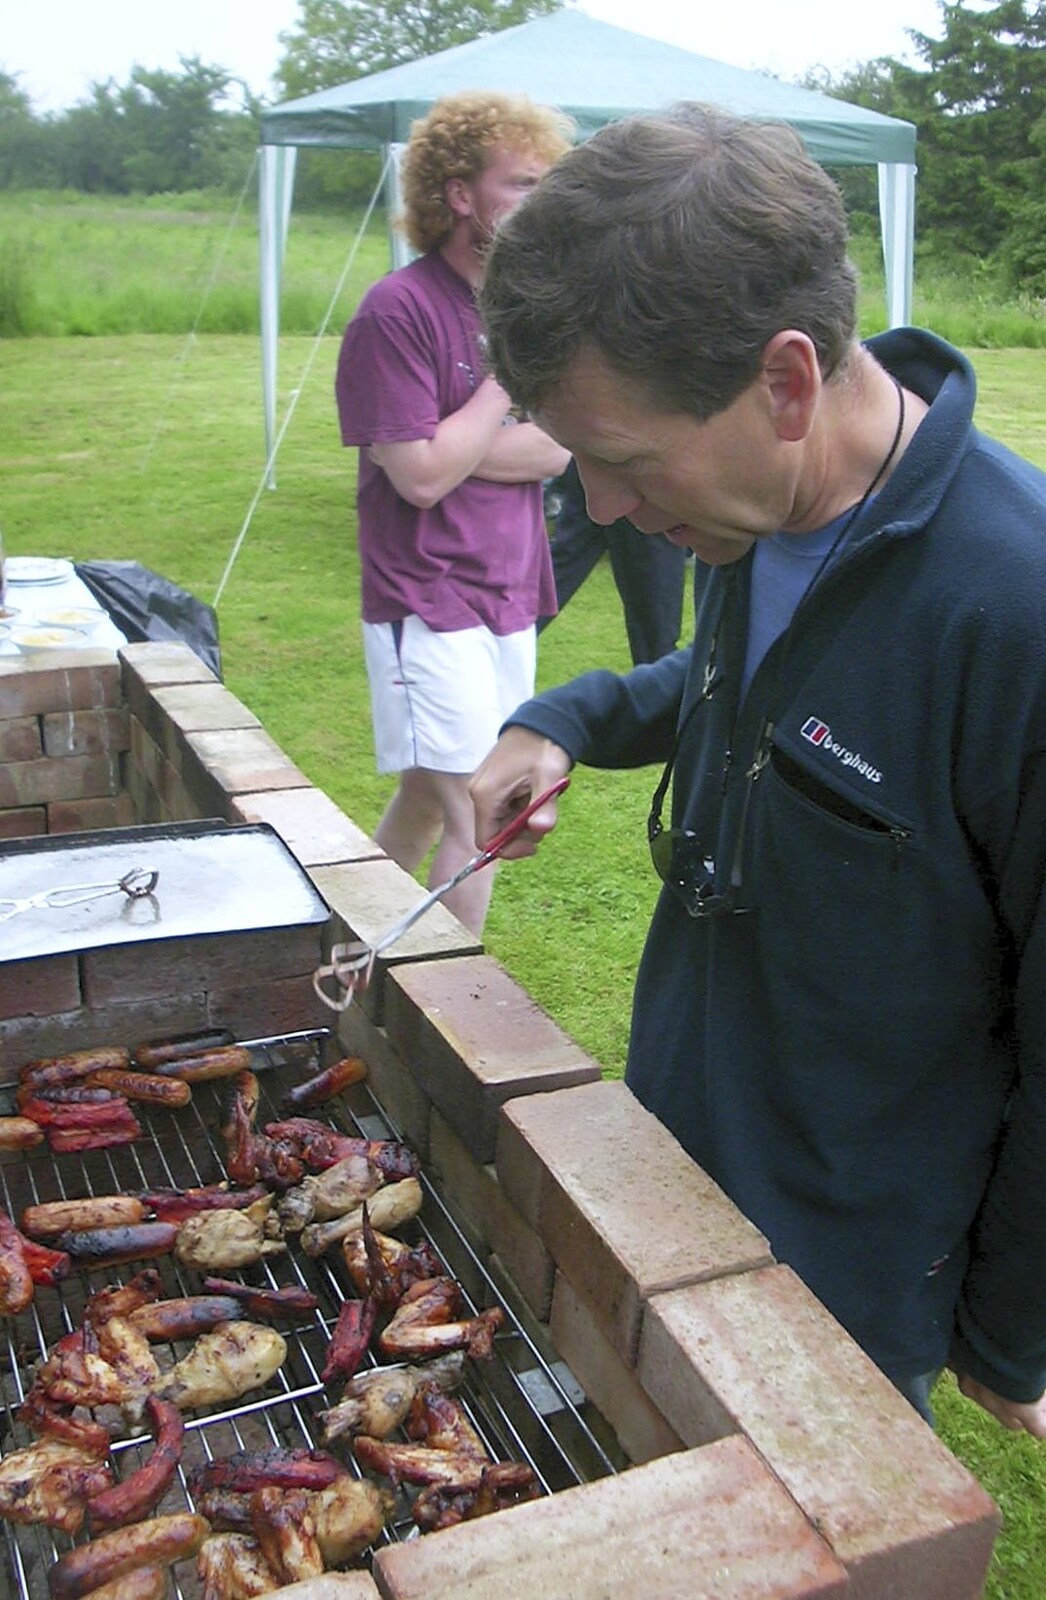 A Rainy Barbeque at the Swan Inn, Brome, Suffolk - 15th June 2002: Apple grabs some meat